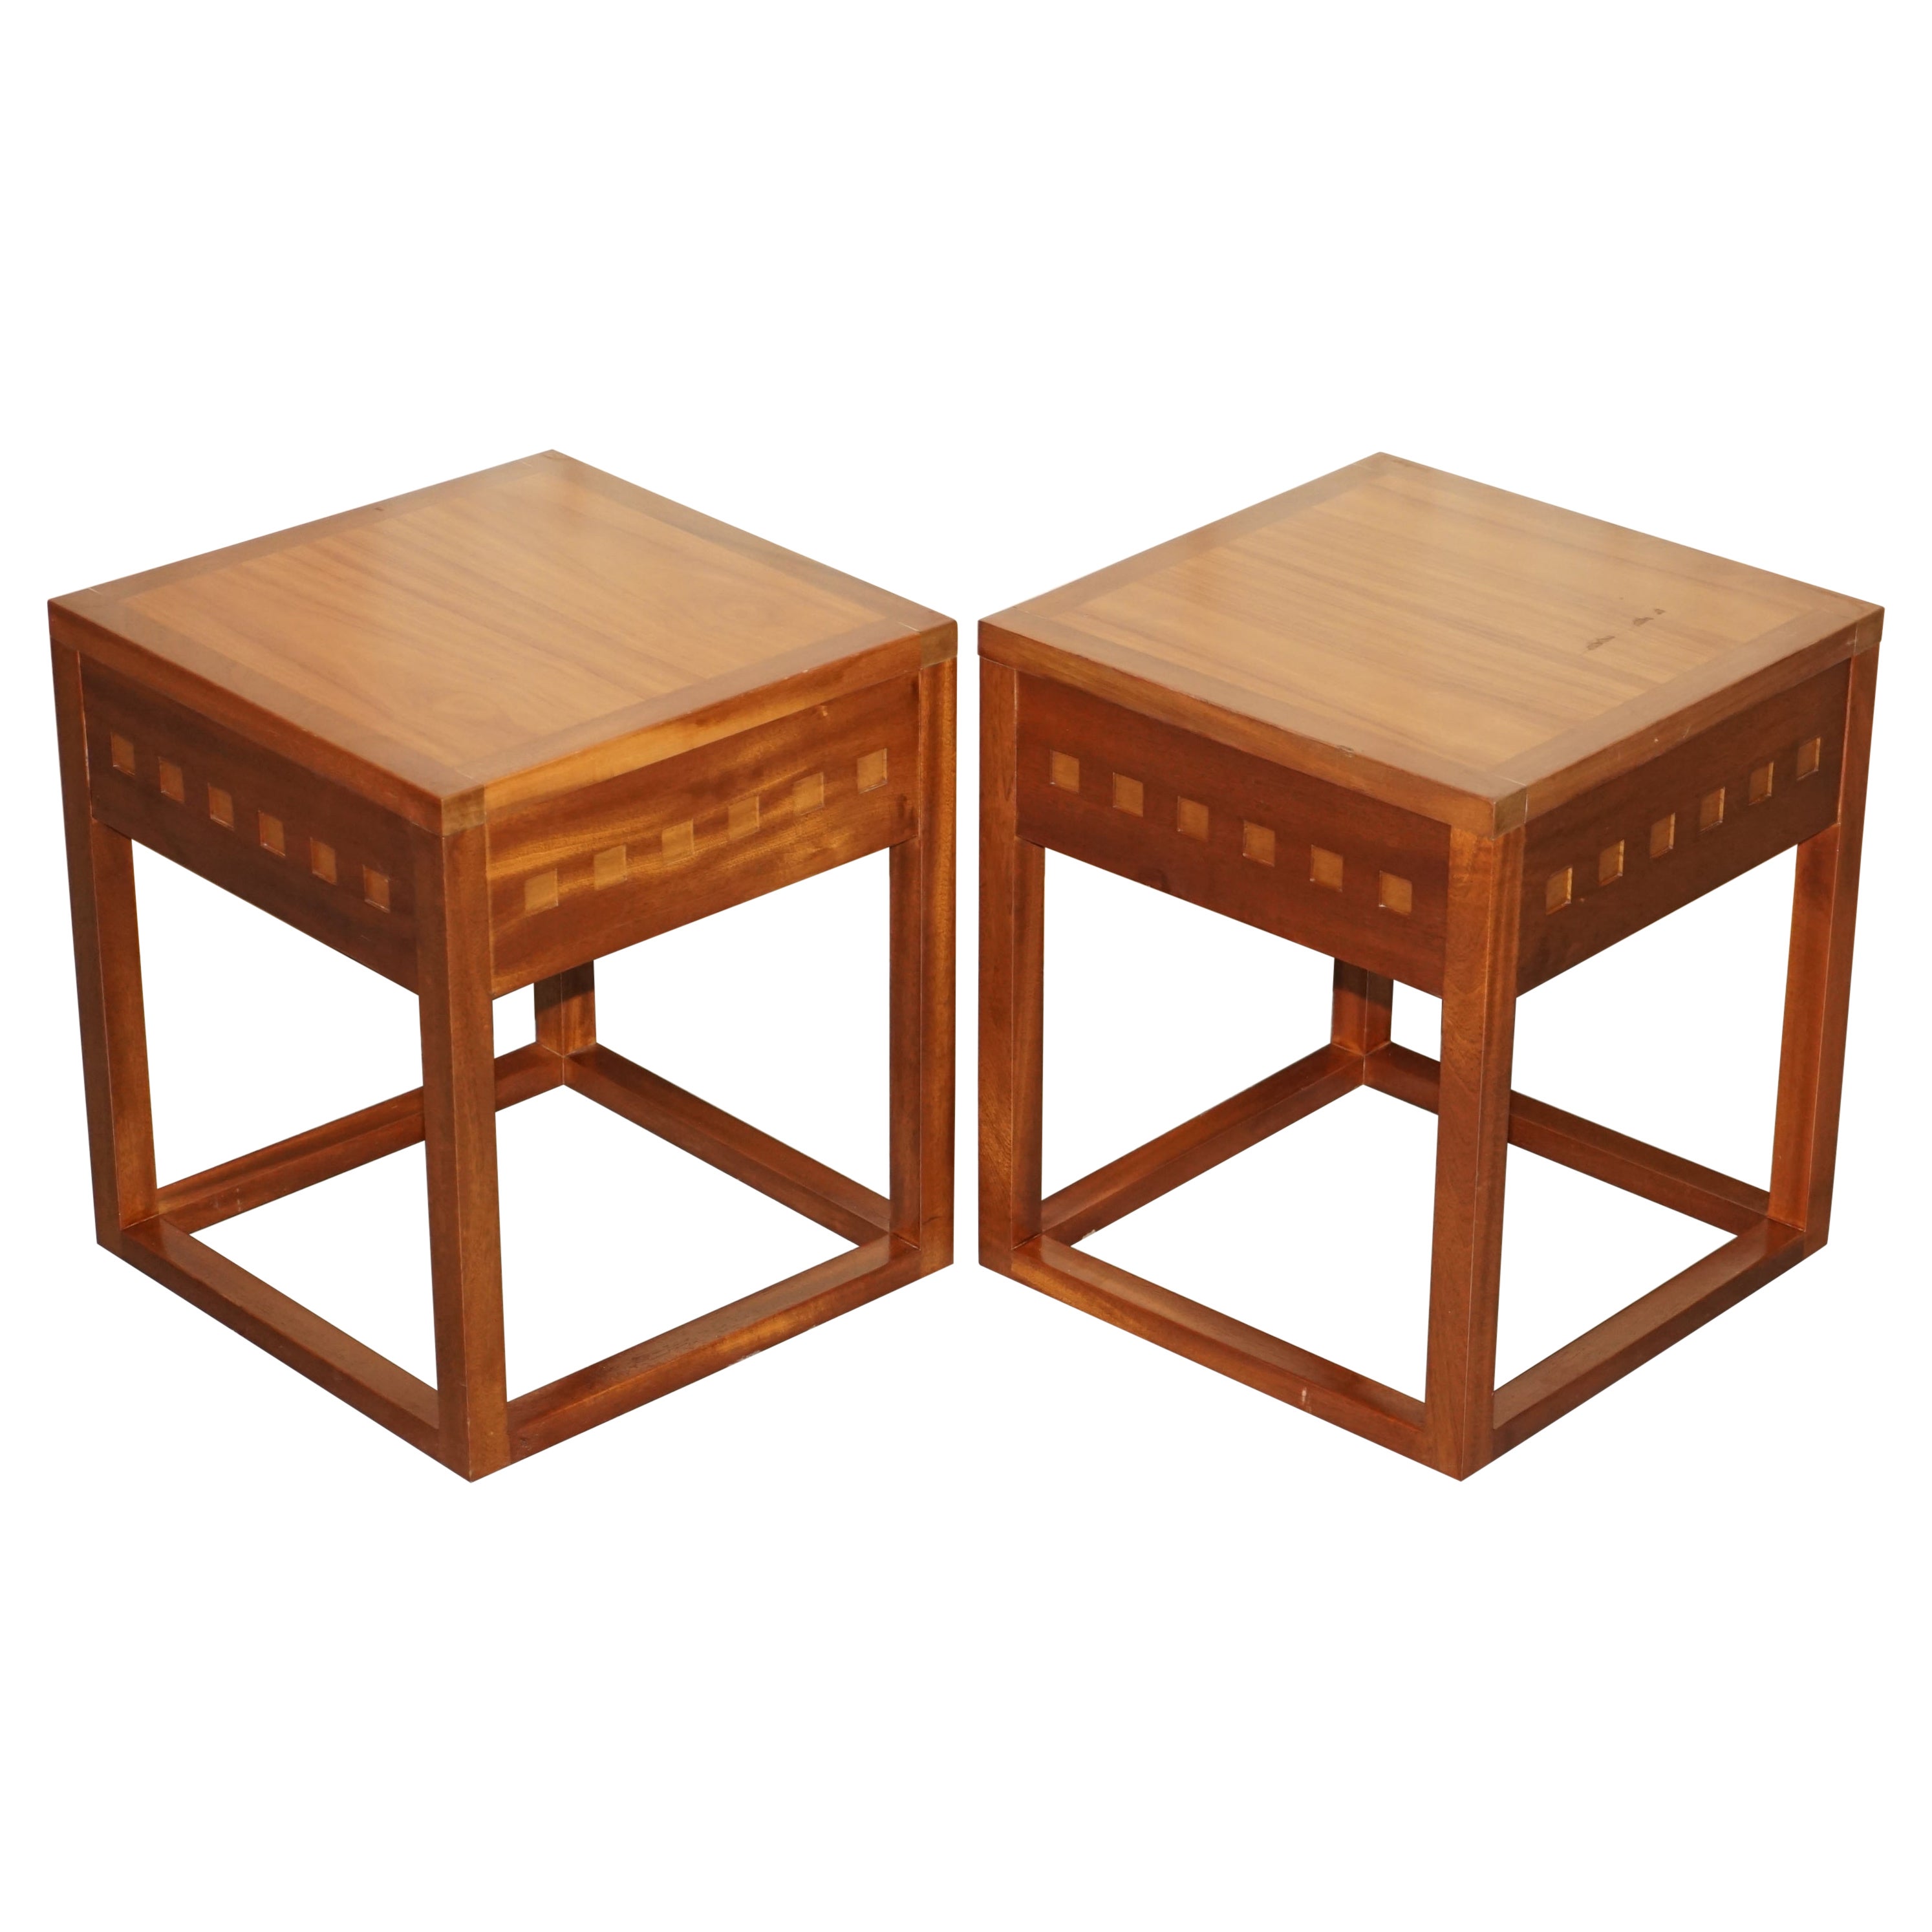 Pair of Modern Hand Made Cherry and Teak Wood Side Tables x 4 Available in Total For Sale